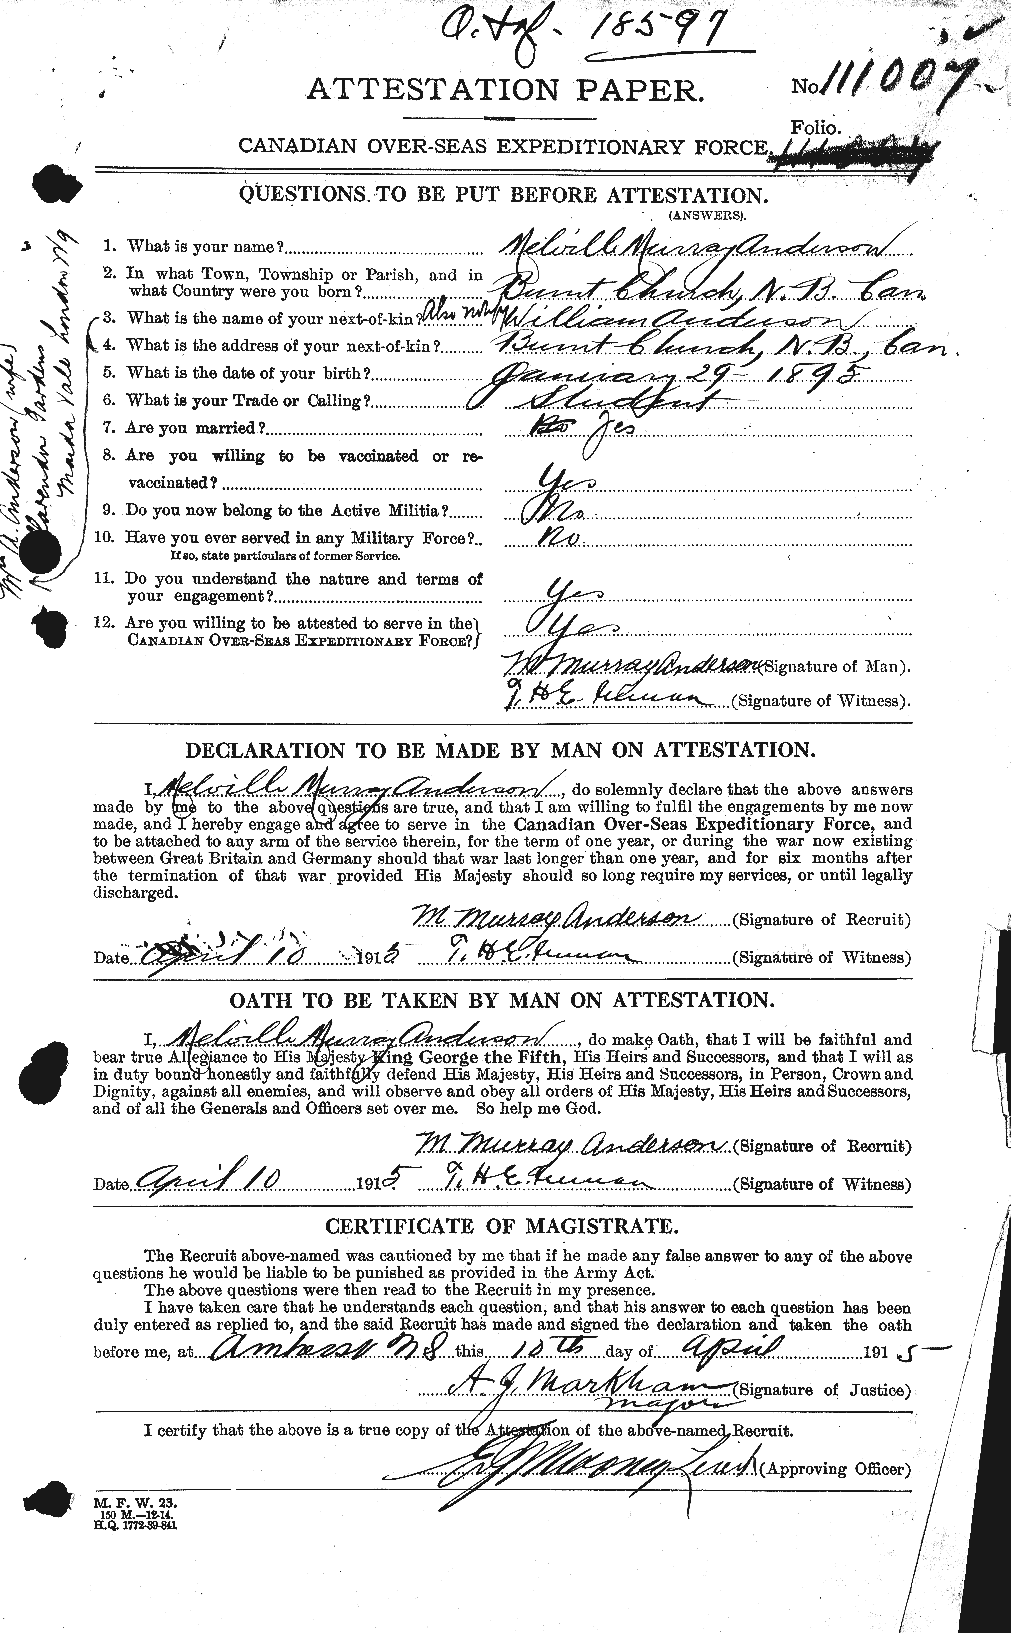 Personnel Records of the First World War - CEF 207425a